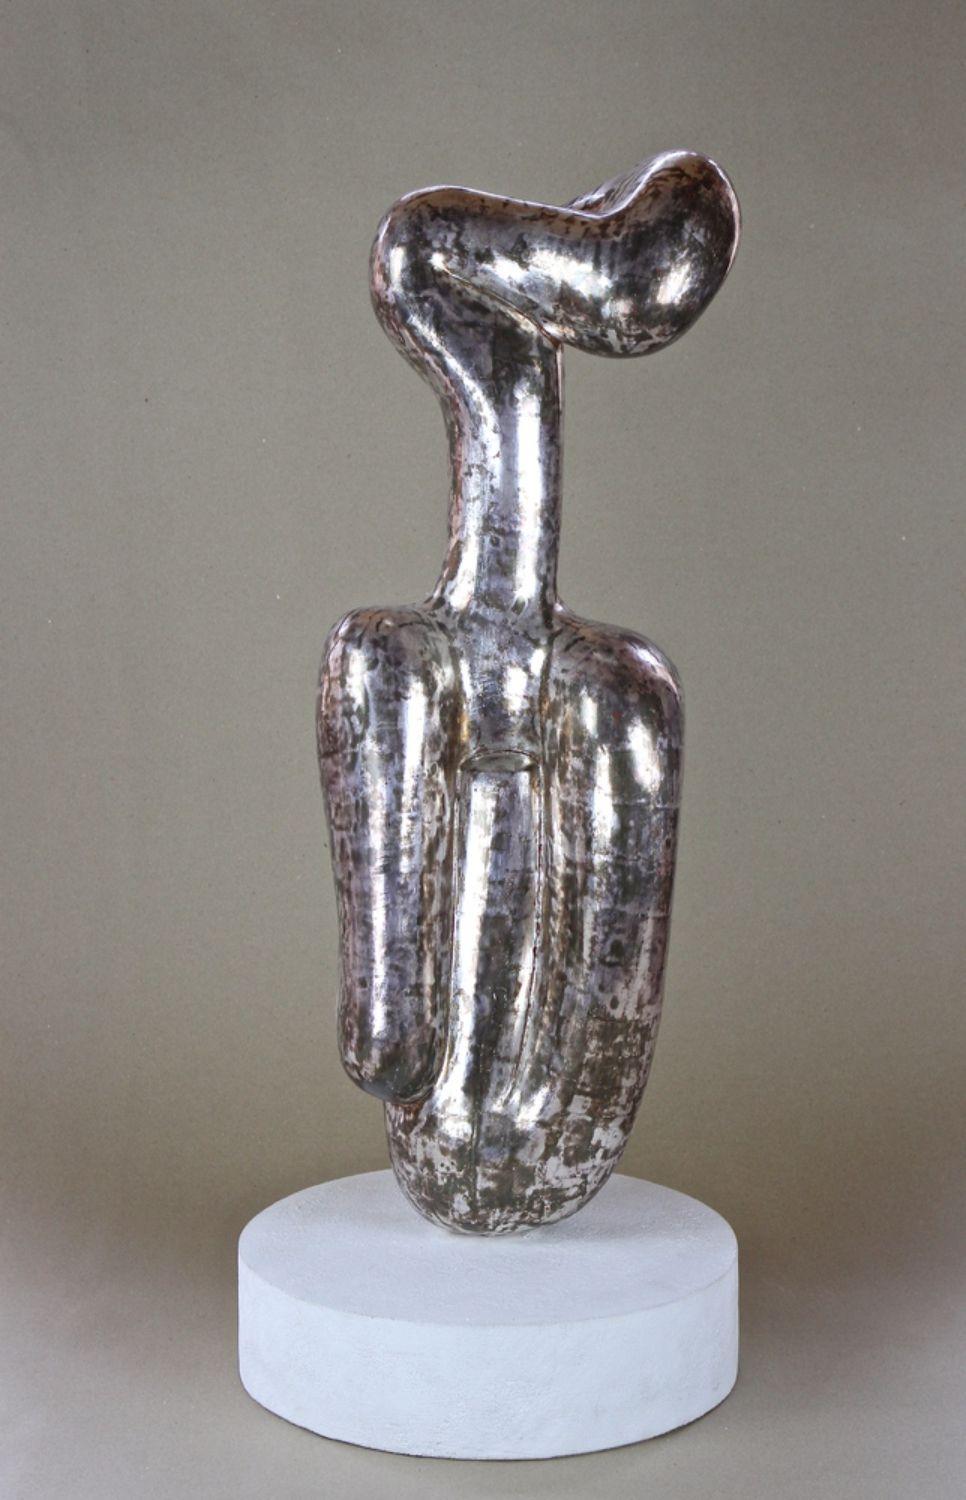 Abstract Contemporary Silvered Sculpture by M. Treml, Handcarved, Austria 2018 In Excellent Condition For Sale In Lichtenberg, AT